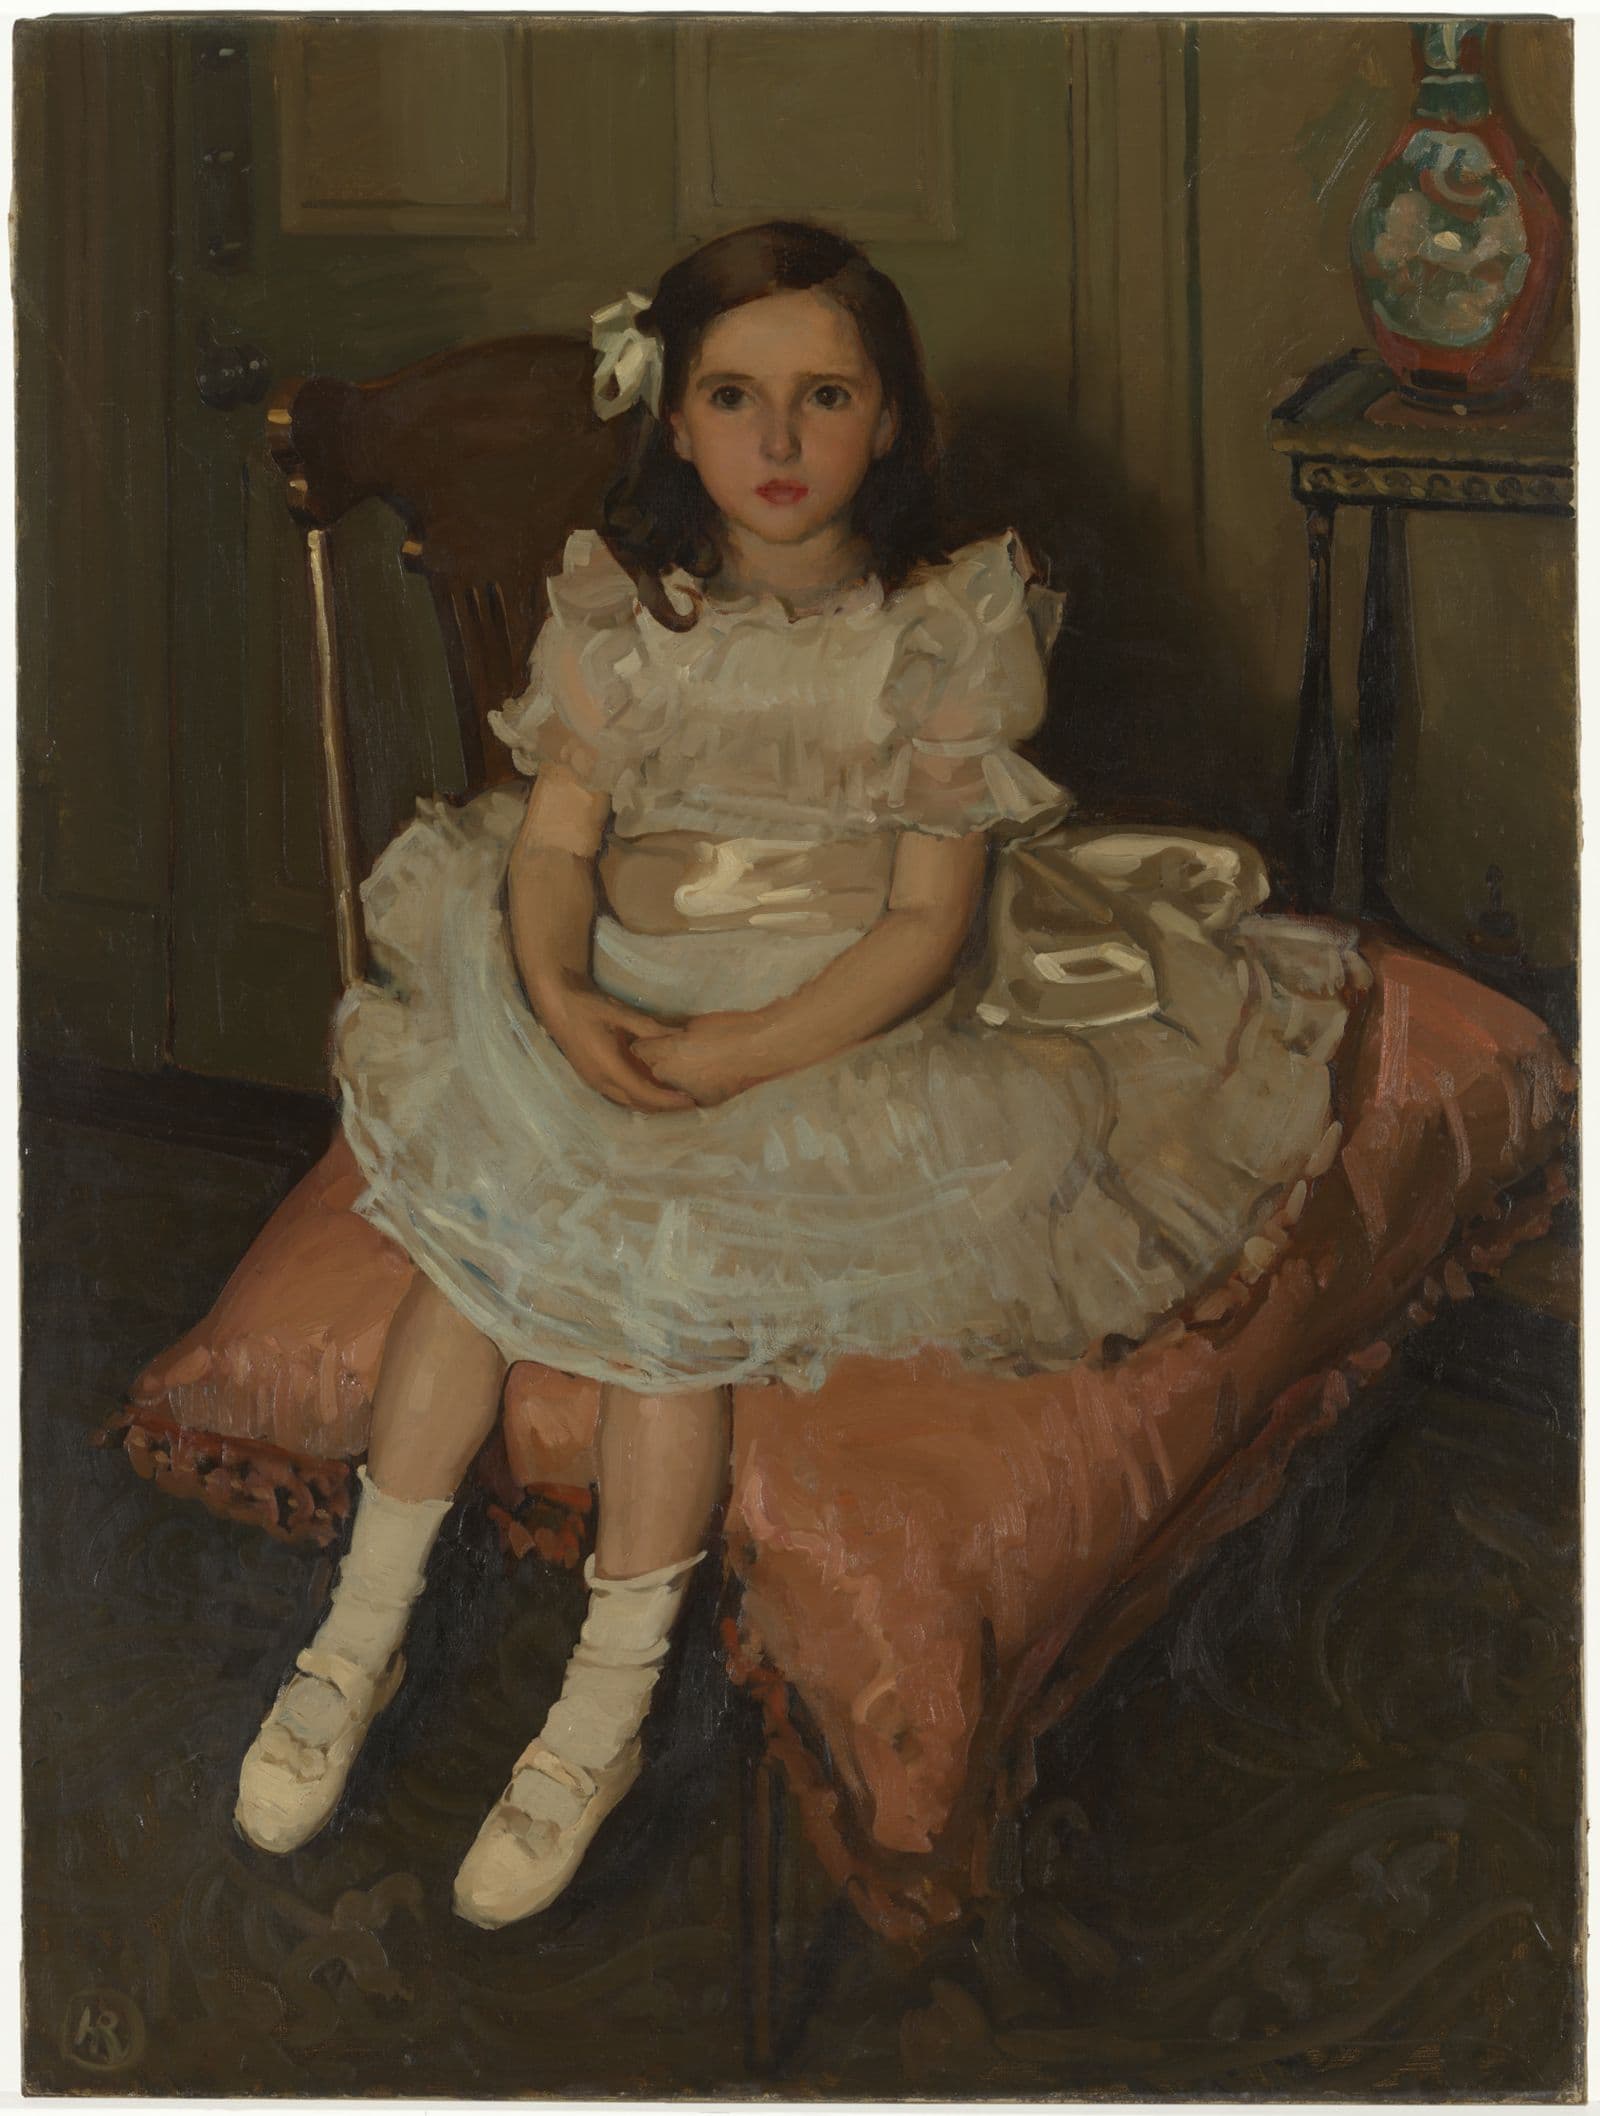 Portrait of a small child in a white frilly dress seated on a chair cushion